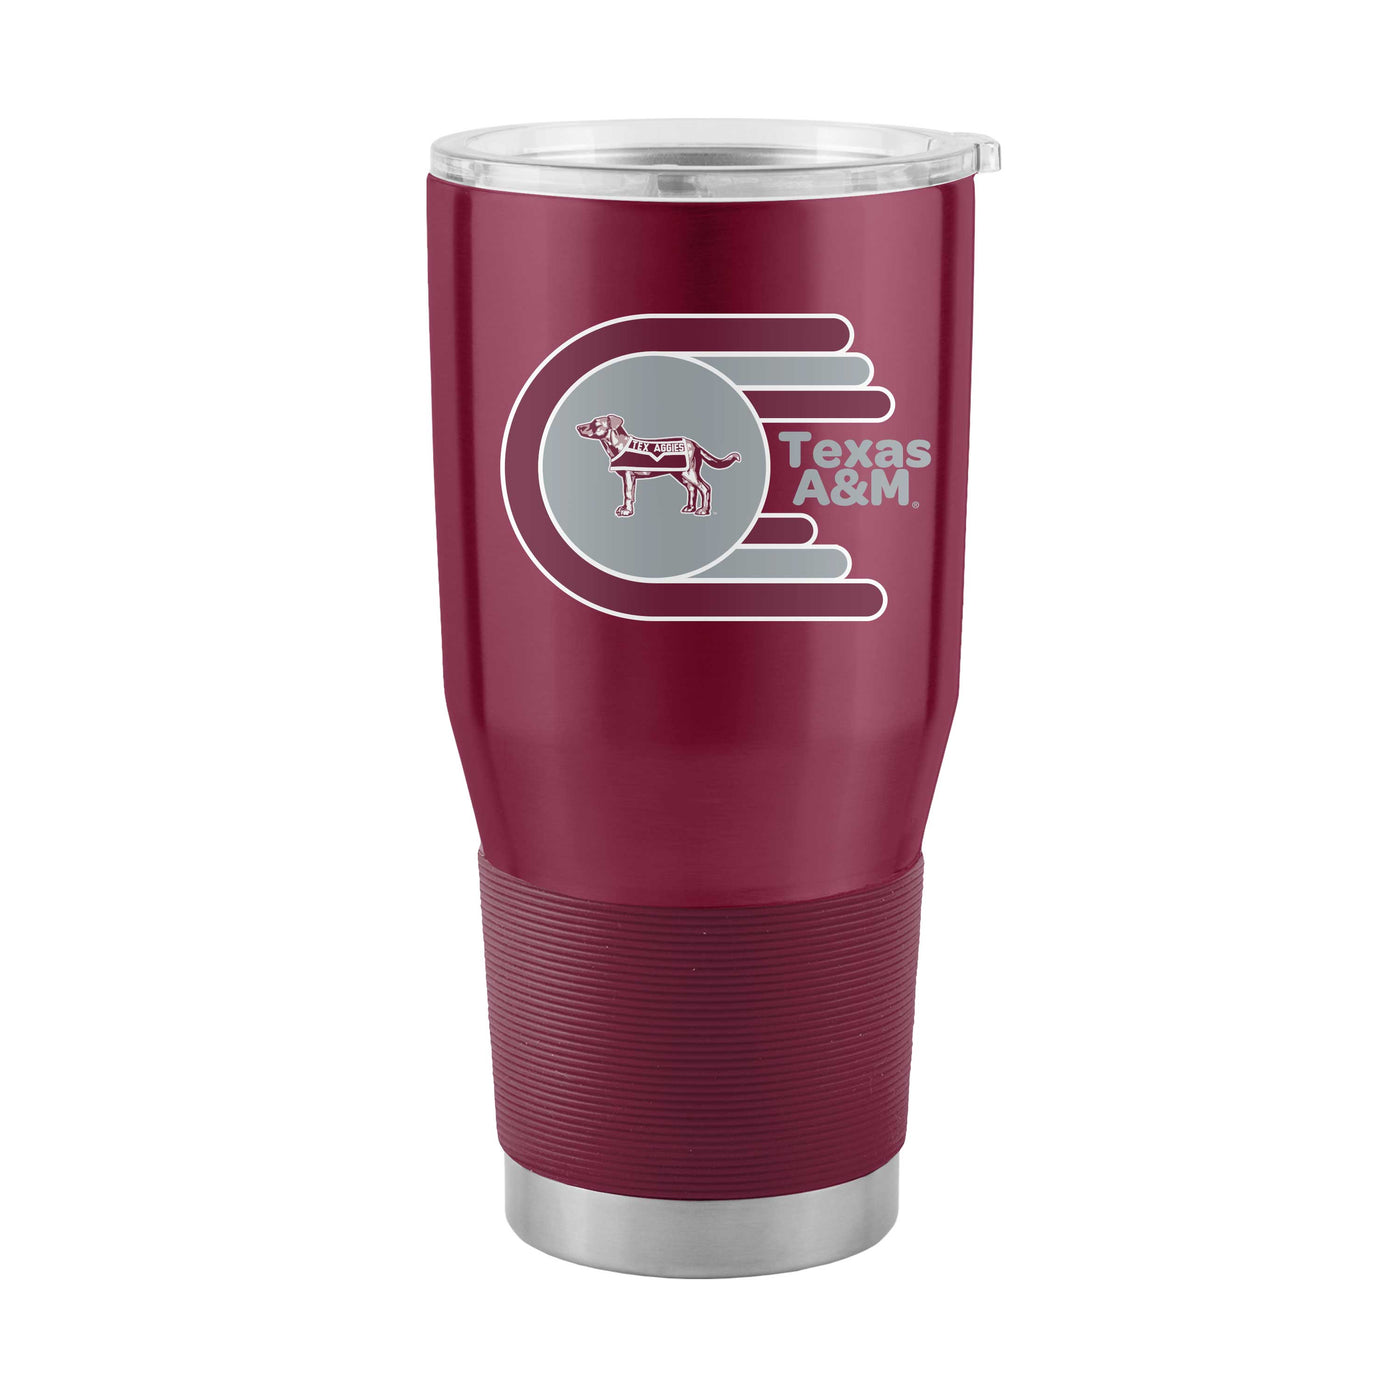 Texas A&M 30oz Whirl Stainless Steel Tumbler